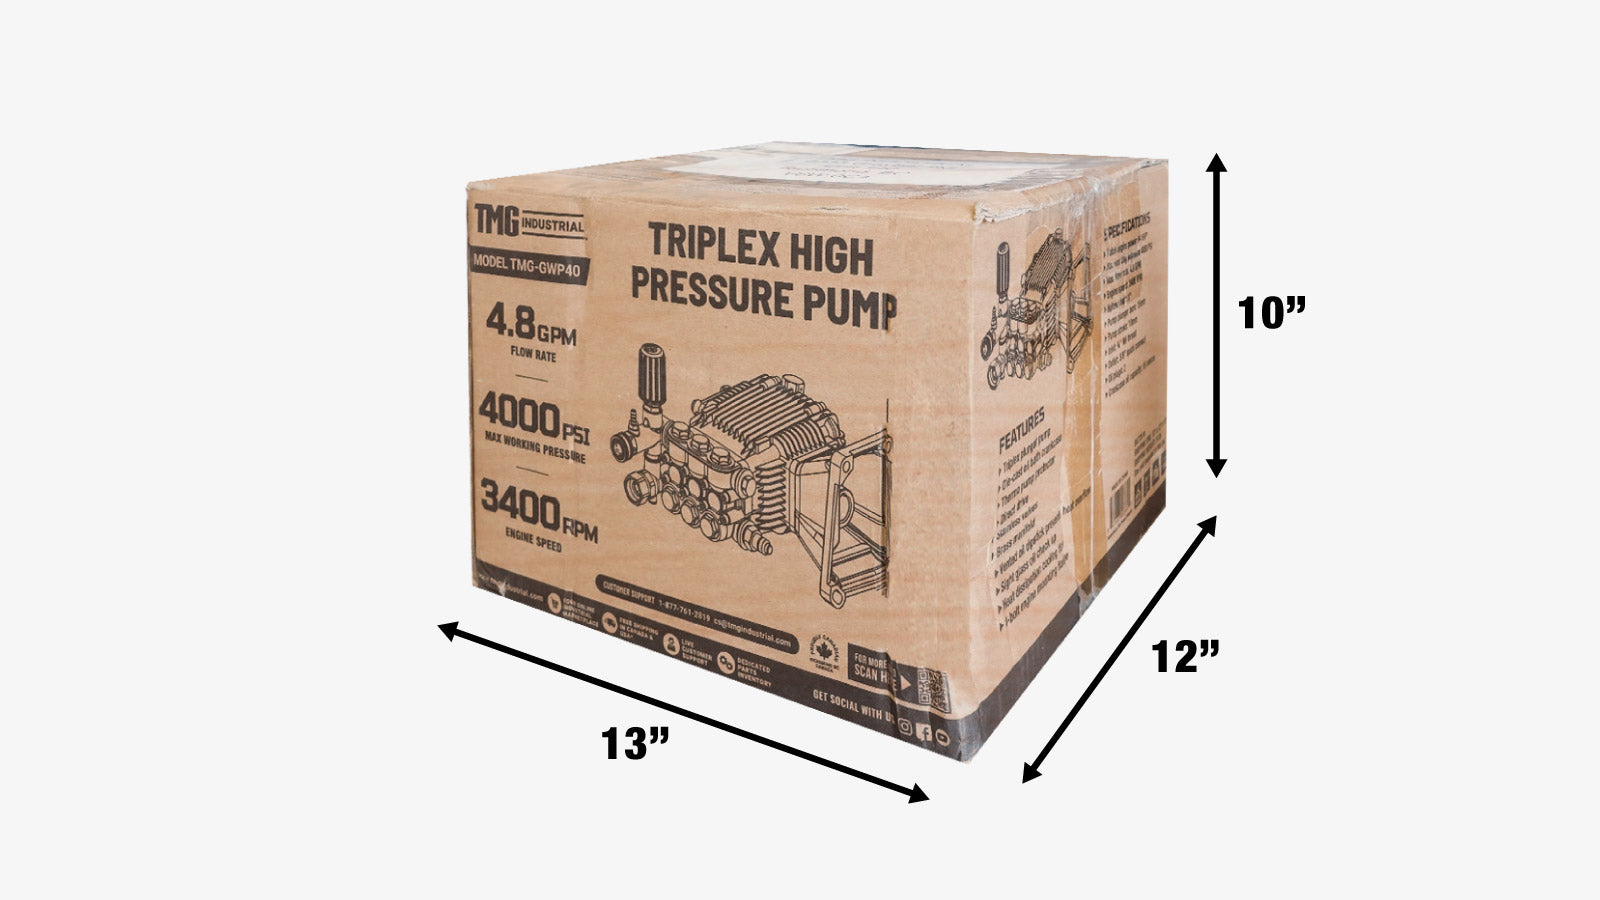 TMG Industrial Triplex Plunger Pressure Pump, Max. 4000 PSI, 5 GPM, 3400 RPM, 1” Hollow Shaft, Compatible Engine Power 9-15 HP, TMG-GWP40-shipping-info-image